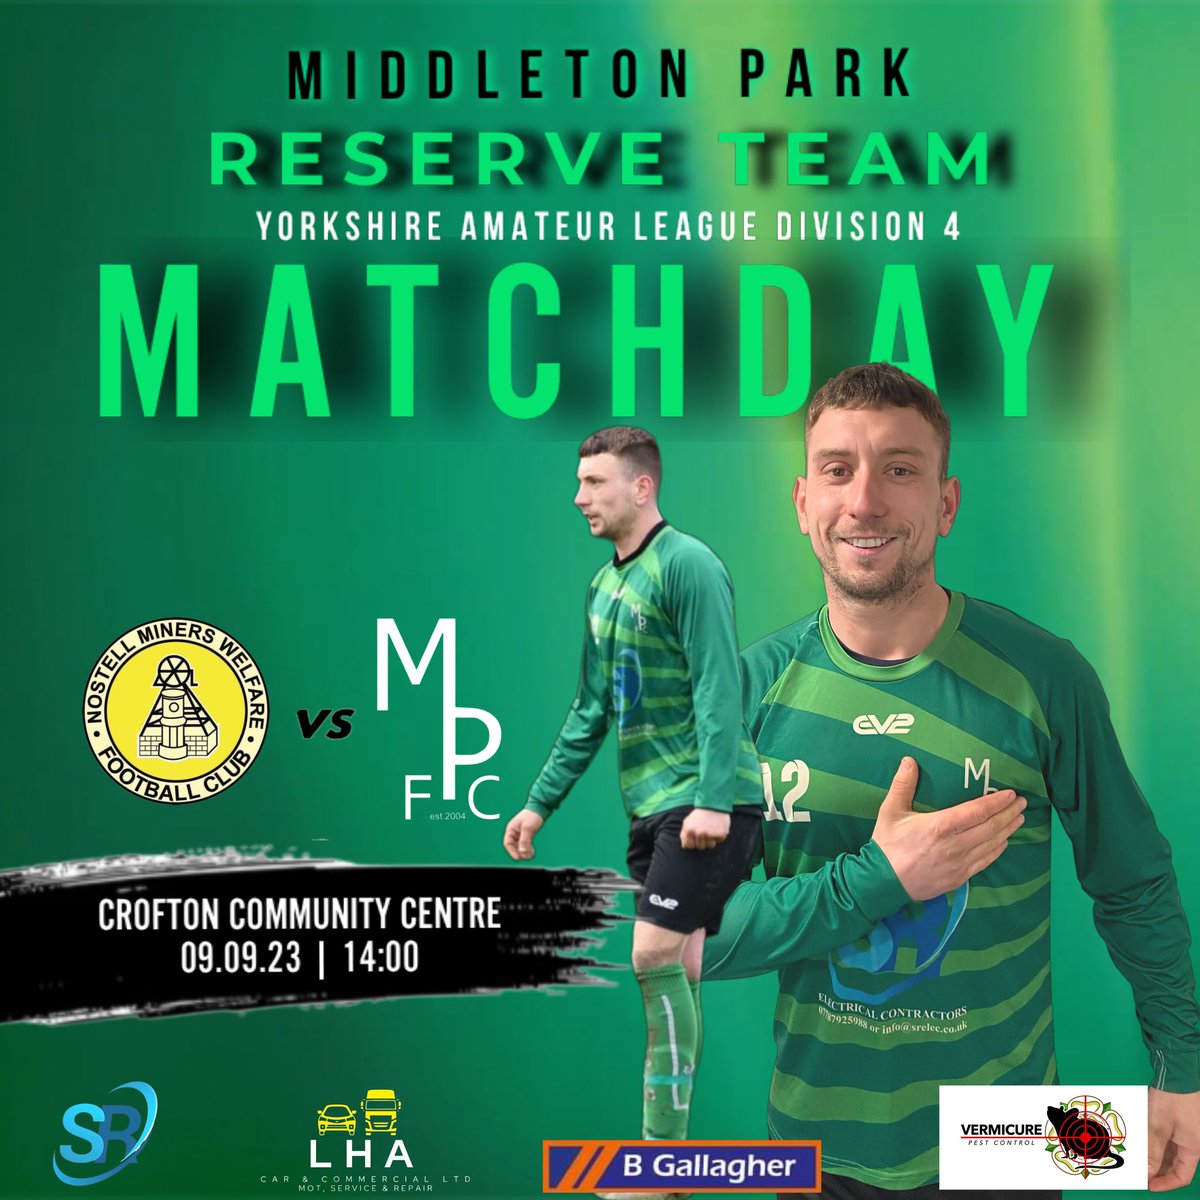 𝐌𝐀𝐓𝐂𝐇𝐃𝐀𝐘 #𝟐 It’s the Middleton Park vs @NostellMW2nds @NostellMW3rds double header. Good luck lads, let’s have a 6 point weekend!! 💚